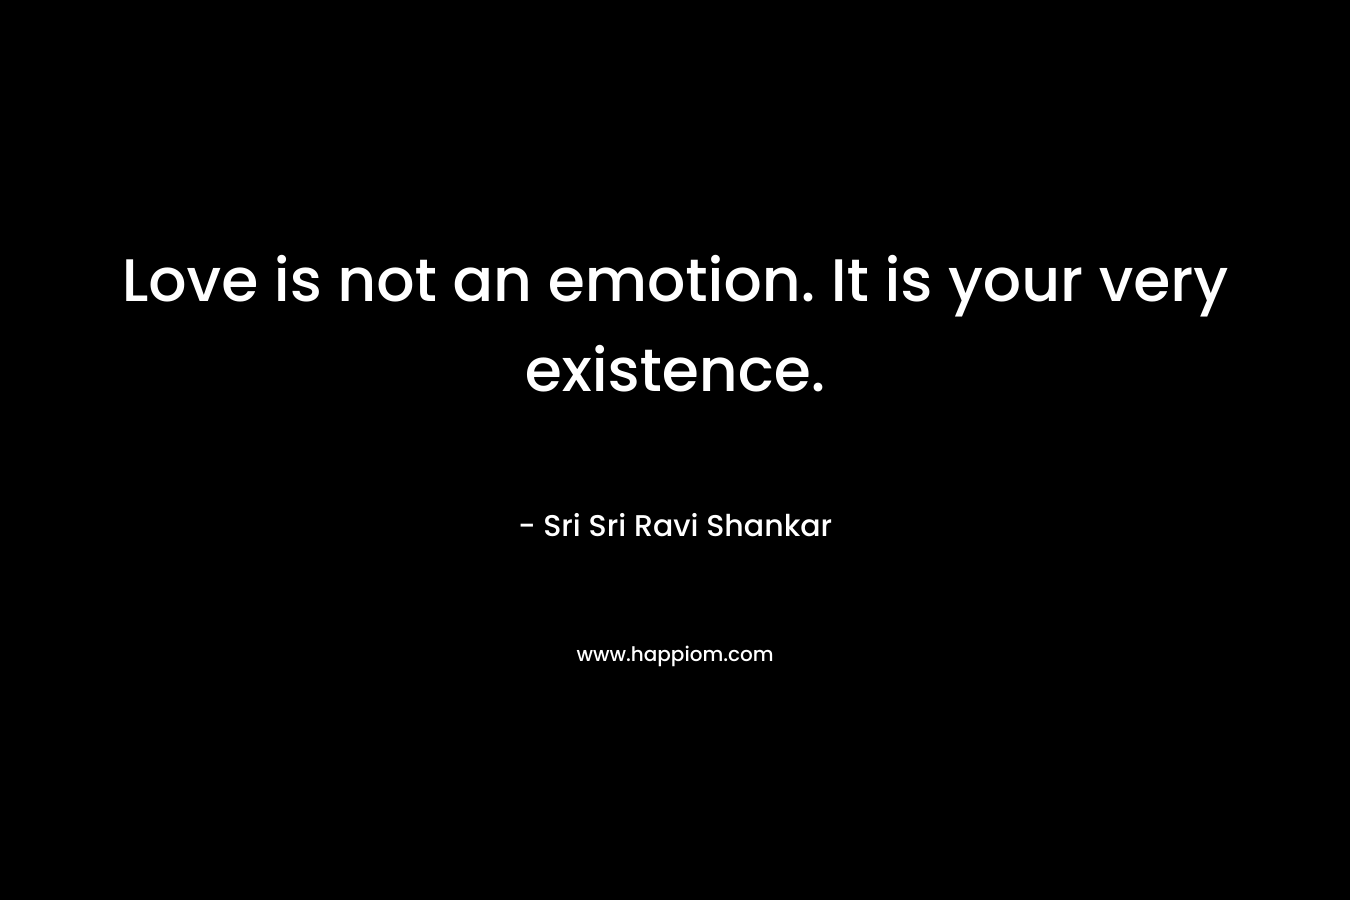 Love is not an emotion. It is your very existence.